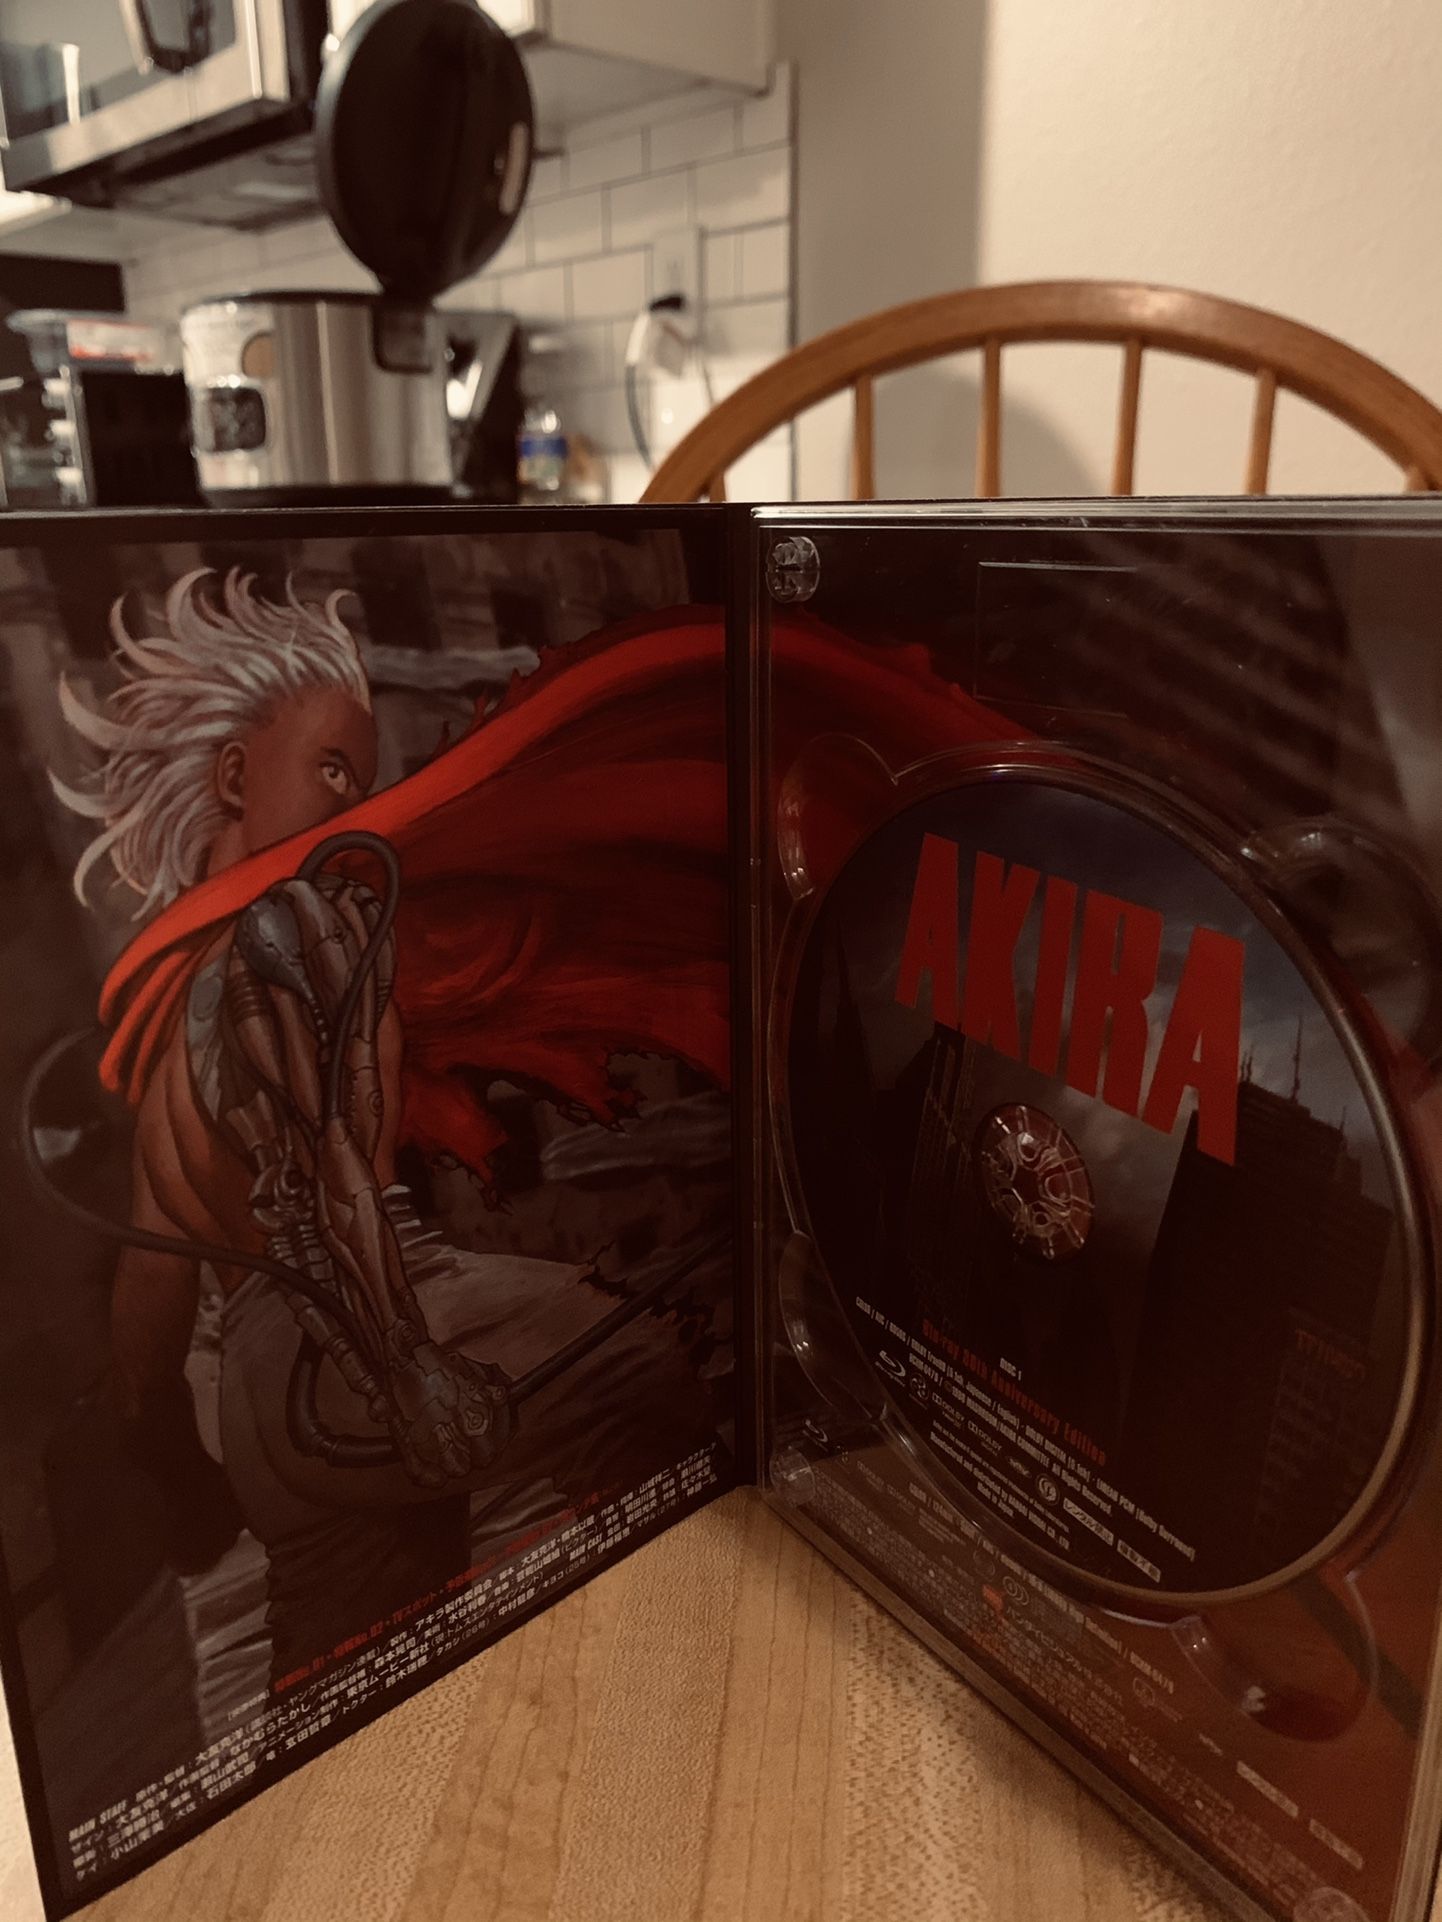 AKIRA 30th Anniversary BLU-ray Japan Release Works In USA Players